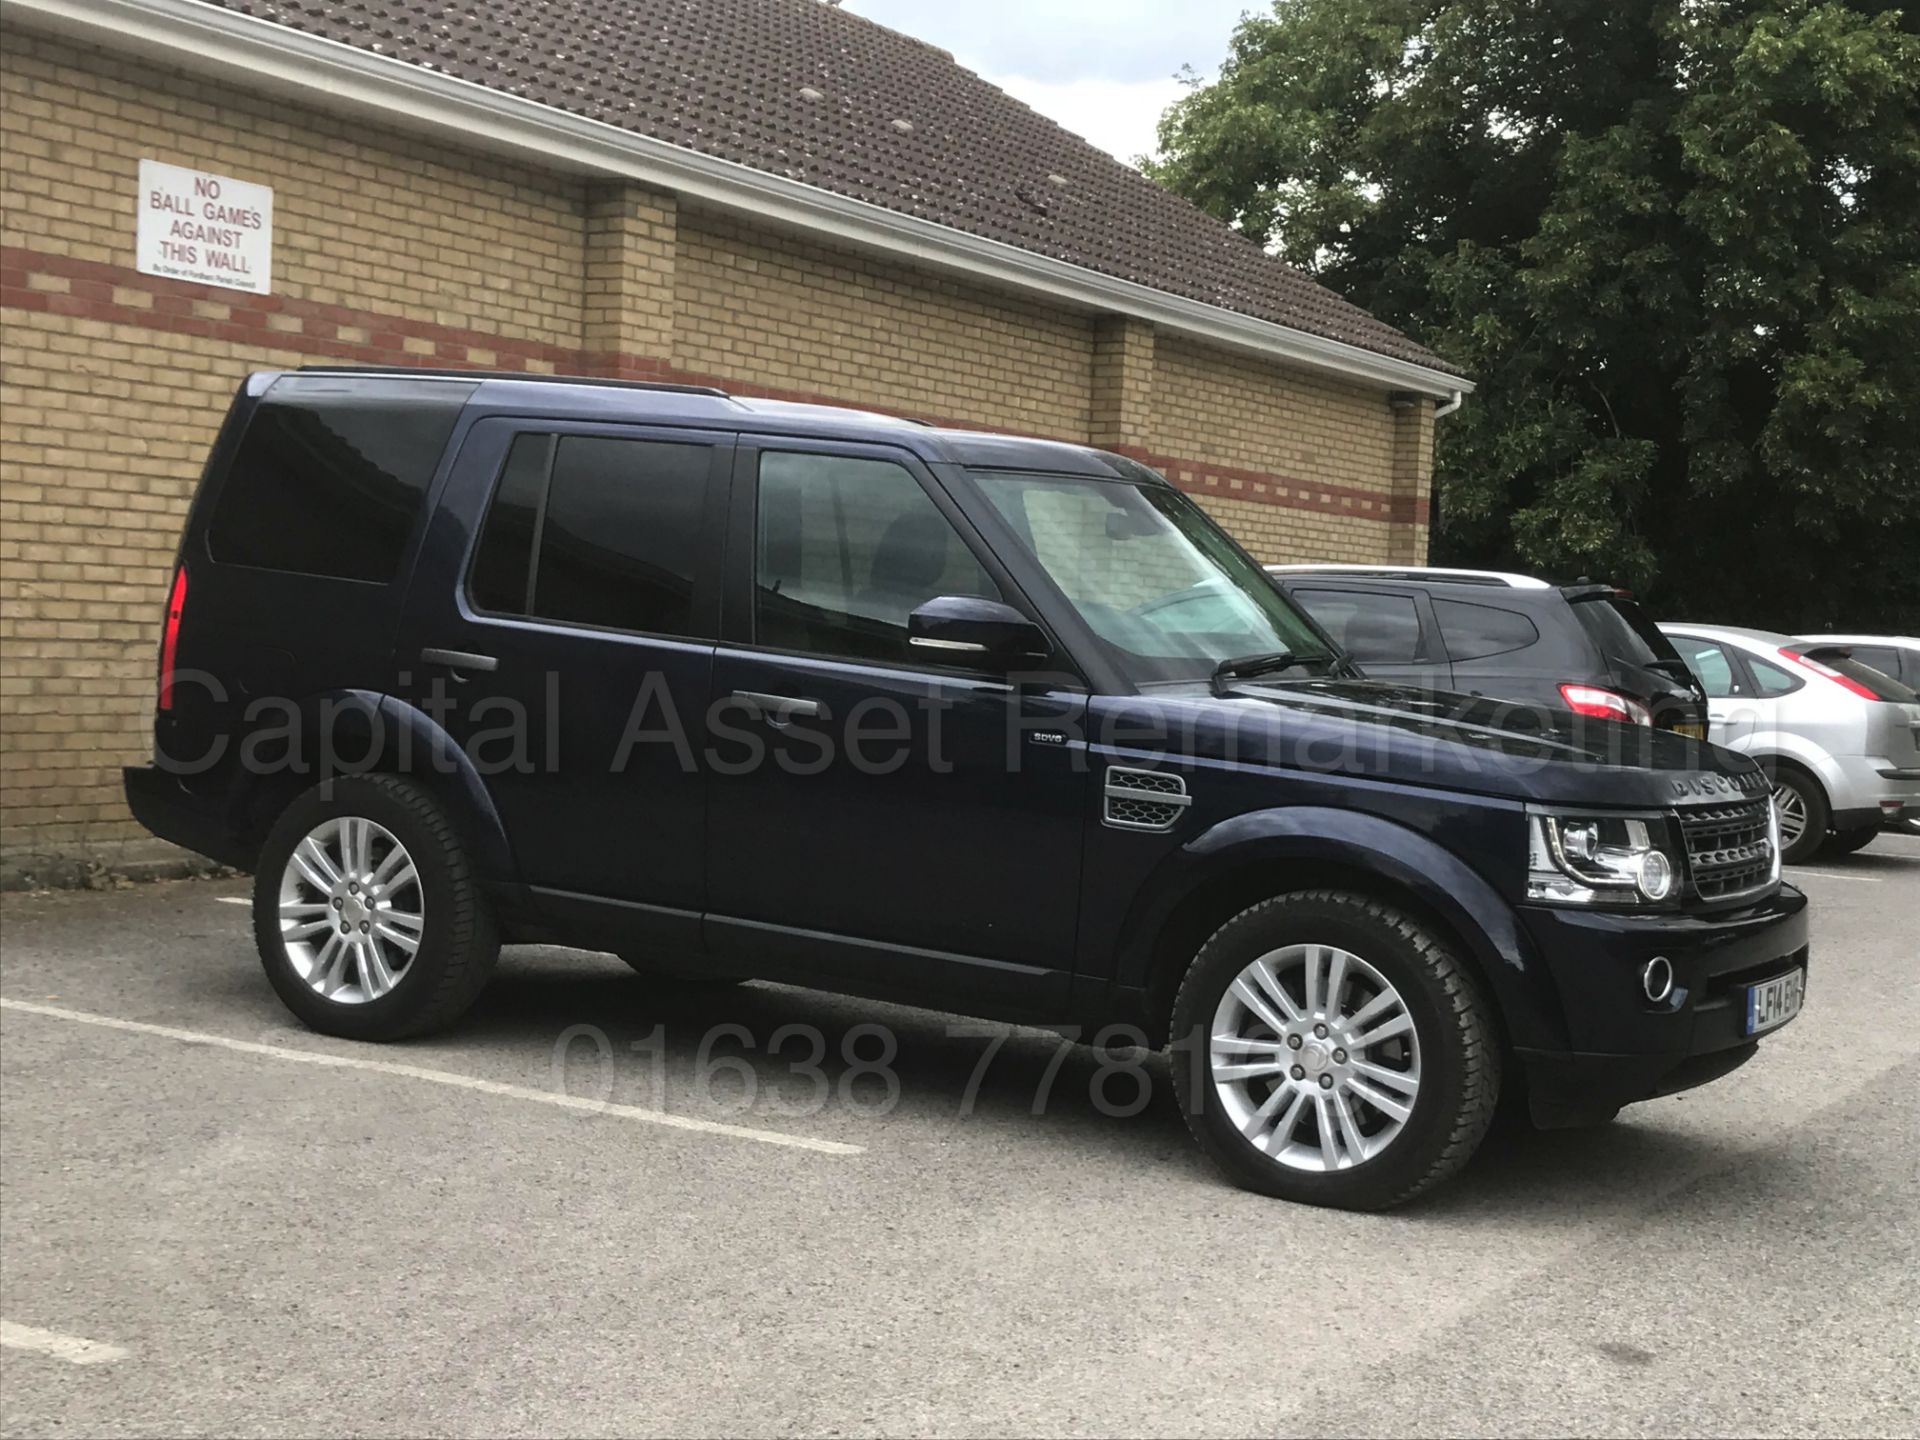 (On Sale) LAND ROVER DISCOVERY *XS EDITION* (2014) '3.0 SDV6 - 225 BHP- 8 SPEED AUTO' *MASSIVE SPEC* - Image 13 of 48